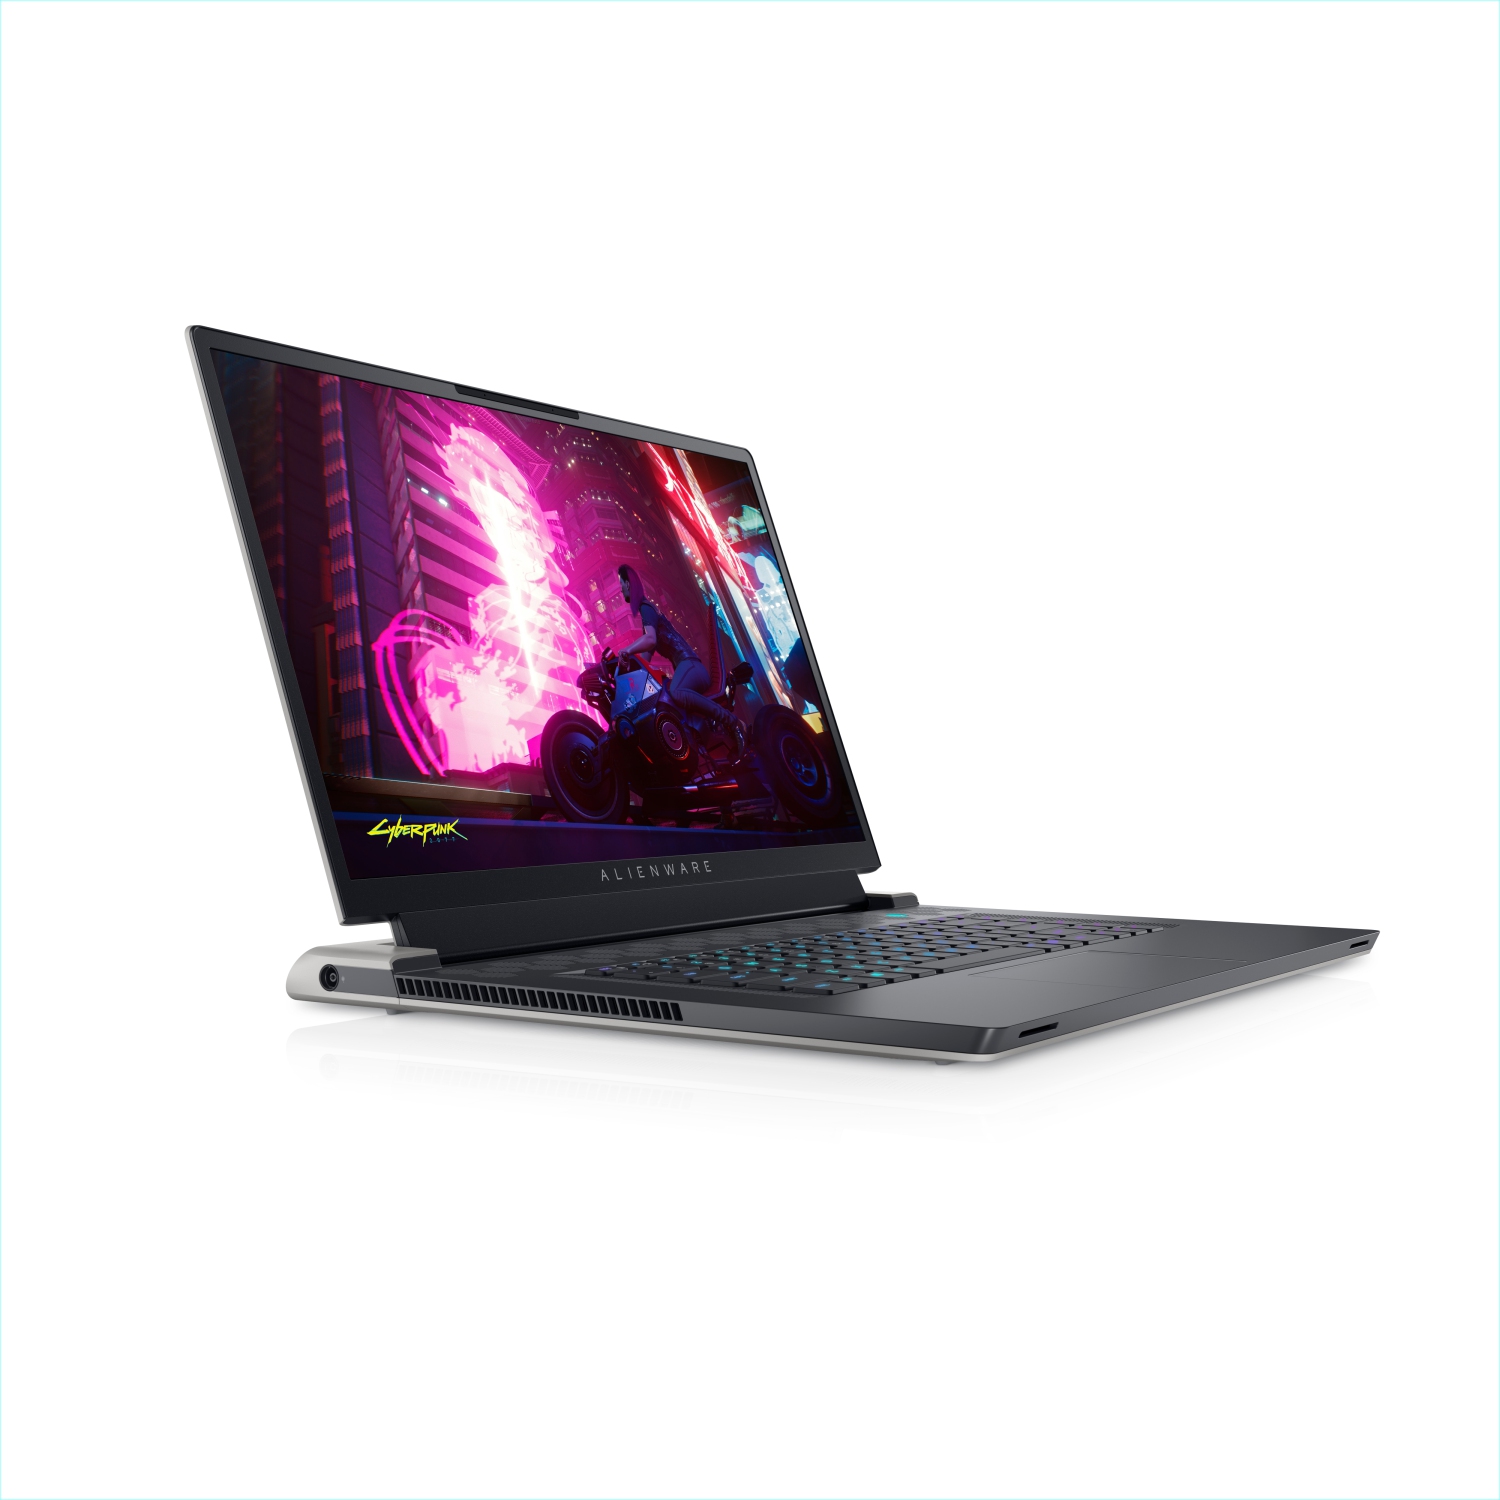 Refurbished (Excellent) - Dell Alienware X17 R1 Gaming Laptop (2021), 17.3" 4K, Core i7, 1TB SSD, 16GB RAM, RTX 3080, 8 Cores @ 4.6 GHz, 11th Gen CPU Certified